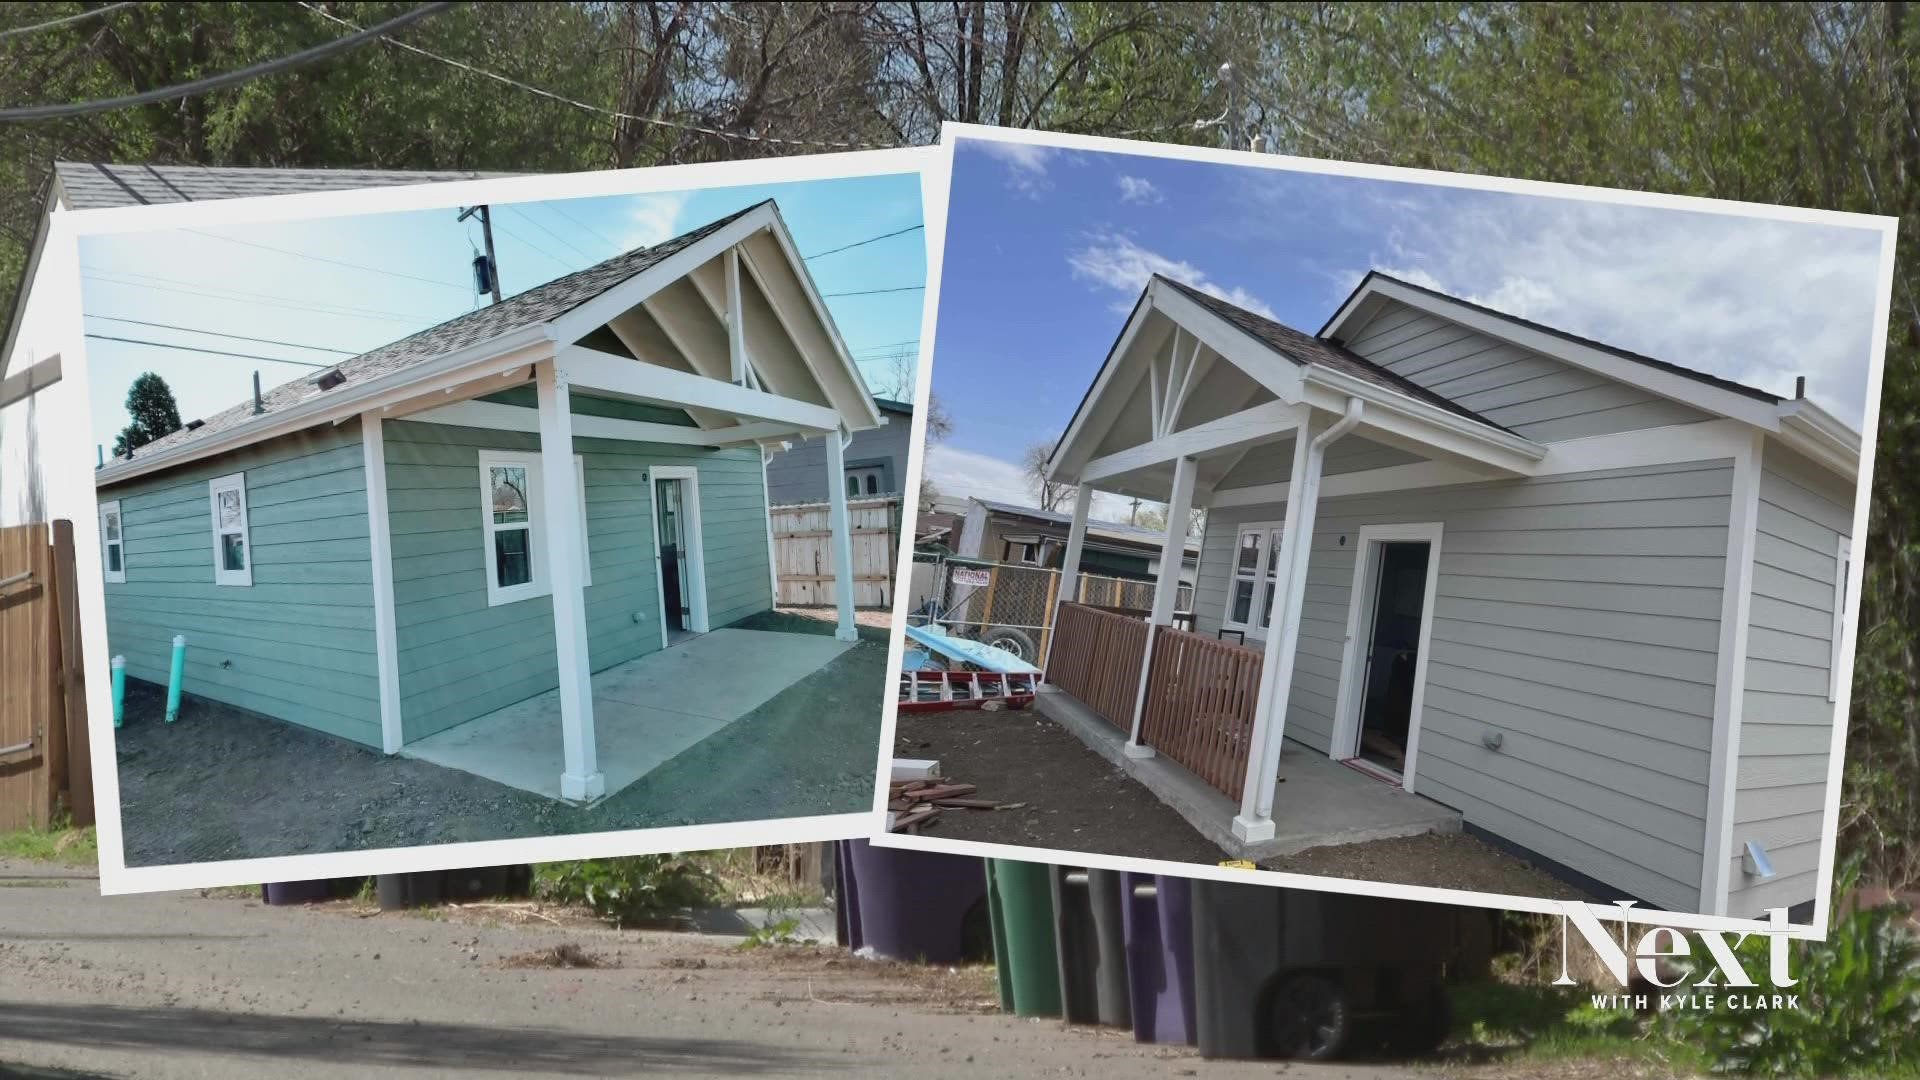 Rezoning now allows homeowners to build Accessory Dwelling Units, or ADUs, commonly known as carriage houses or mother-in-law suites, on their property.